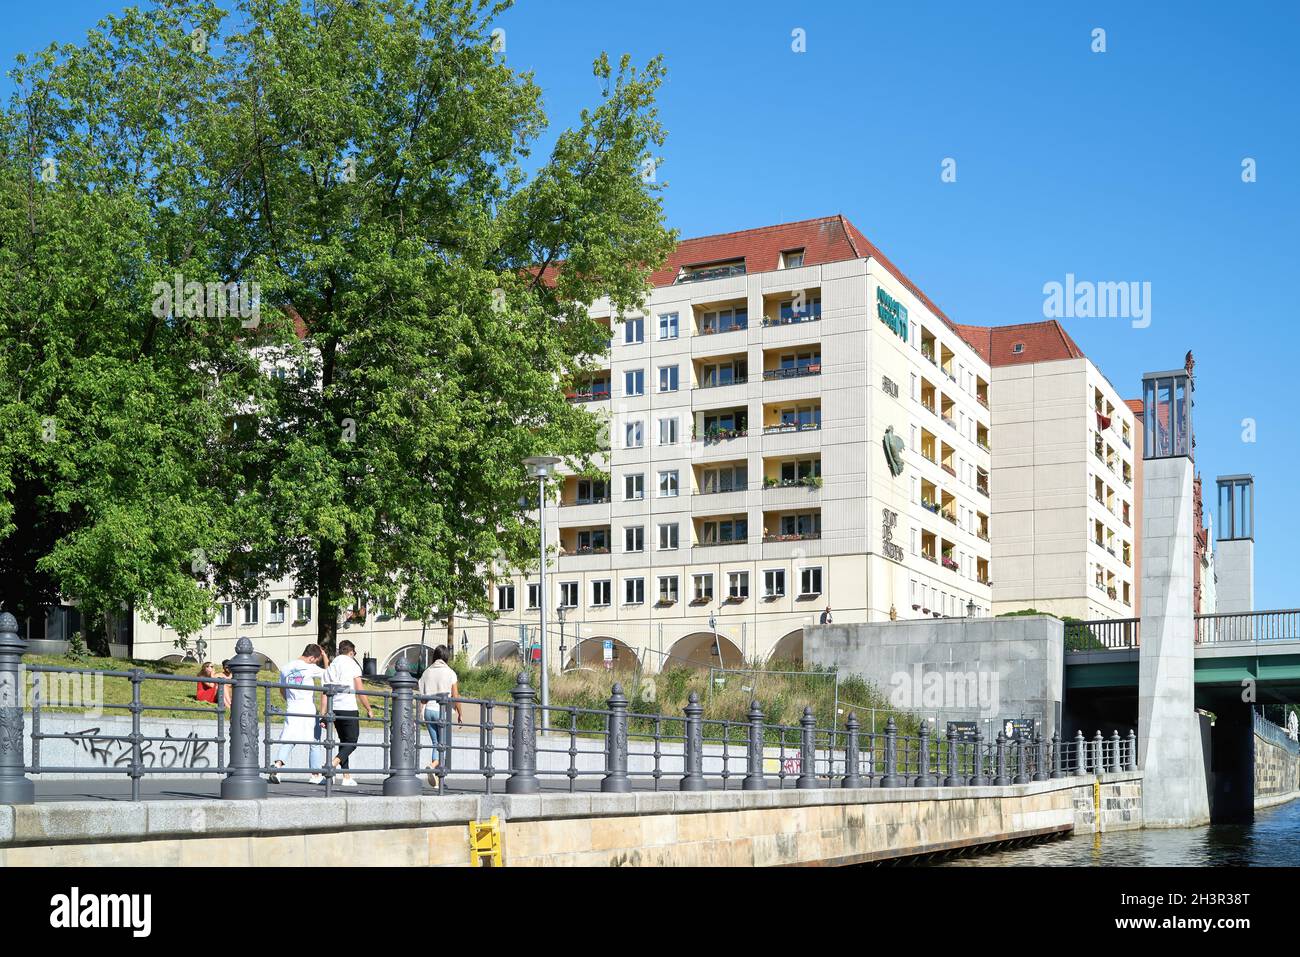 Nikolai quarter in the center of the German capital Berlin seen from the river Spree Stock Photo